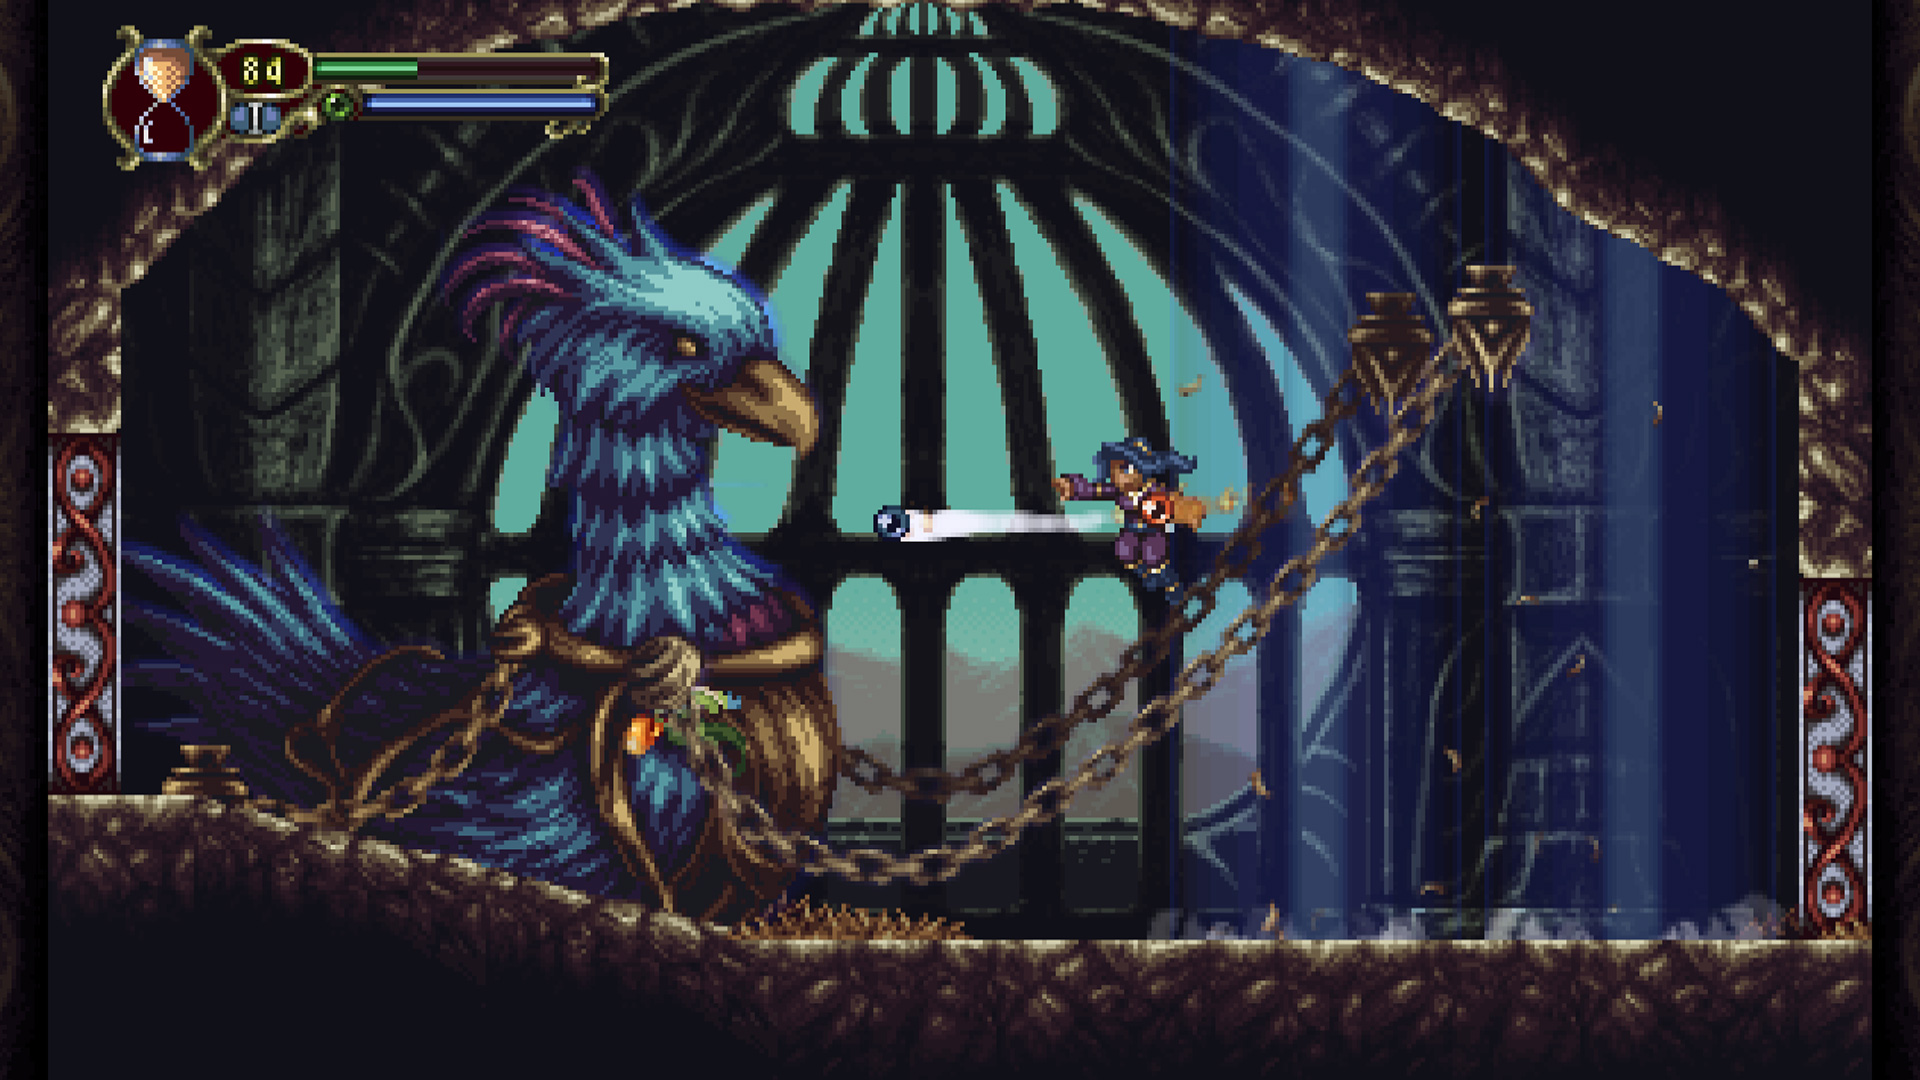 2D, Action, adventure, Chucklefish, indie, Lunar Ray Games, Metroidvania, Platformer, PS4, PS4 Review, Rating 8/10, Role Playing Game, RPG, Timespinner